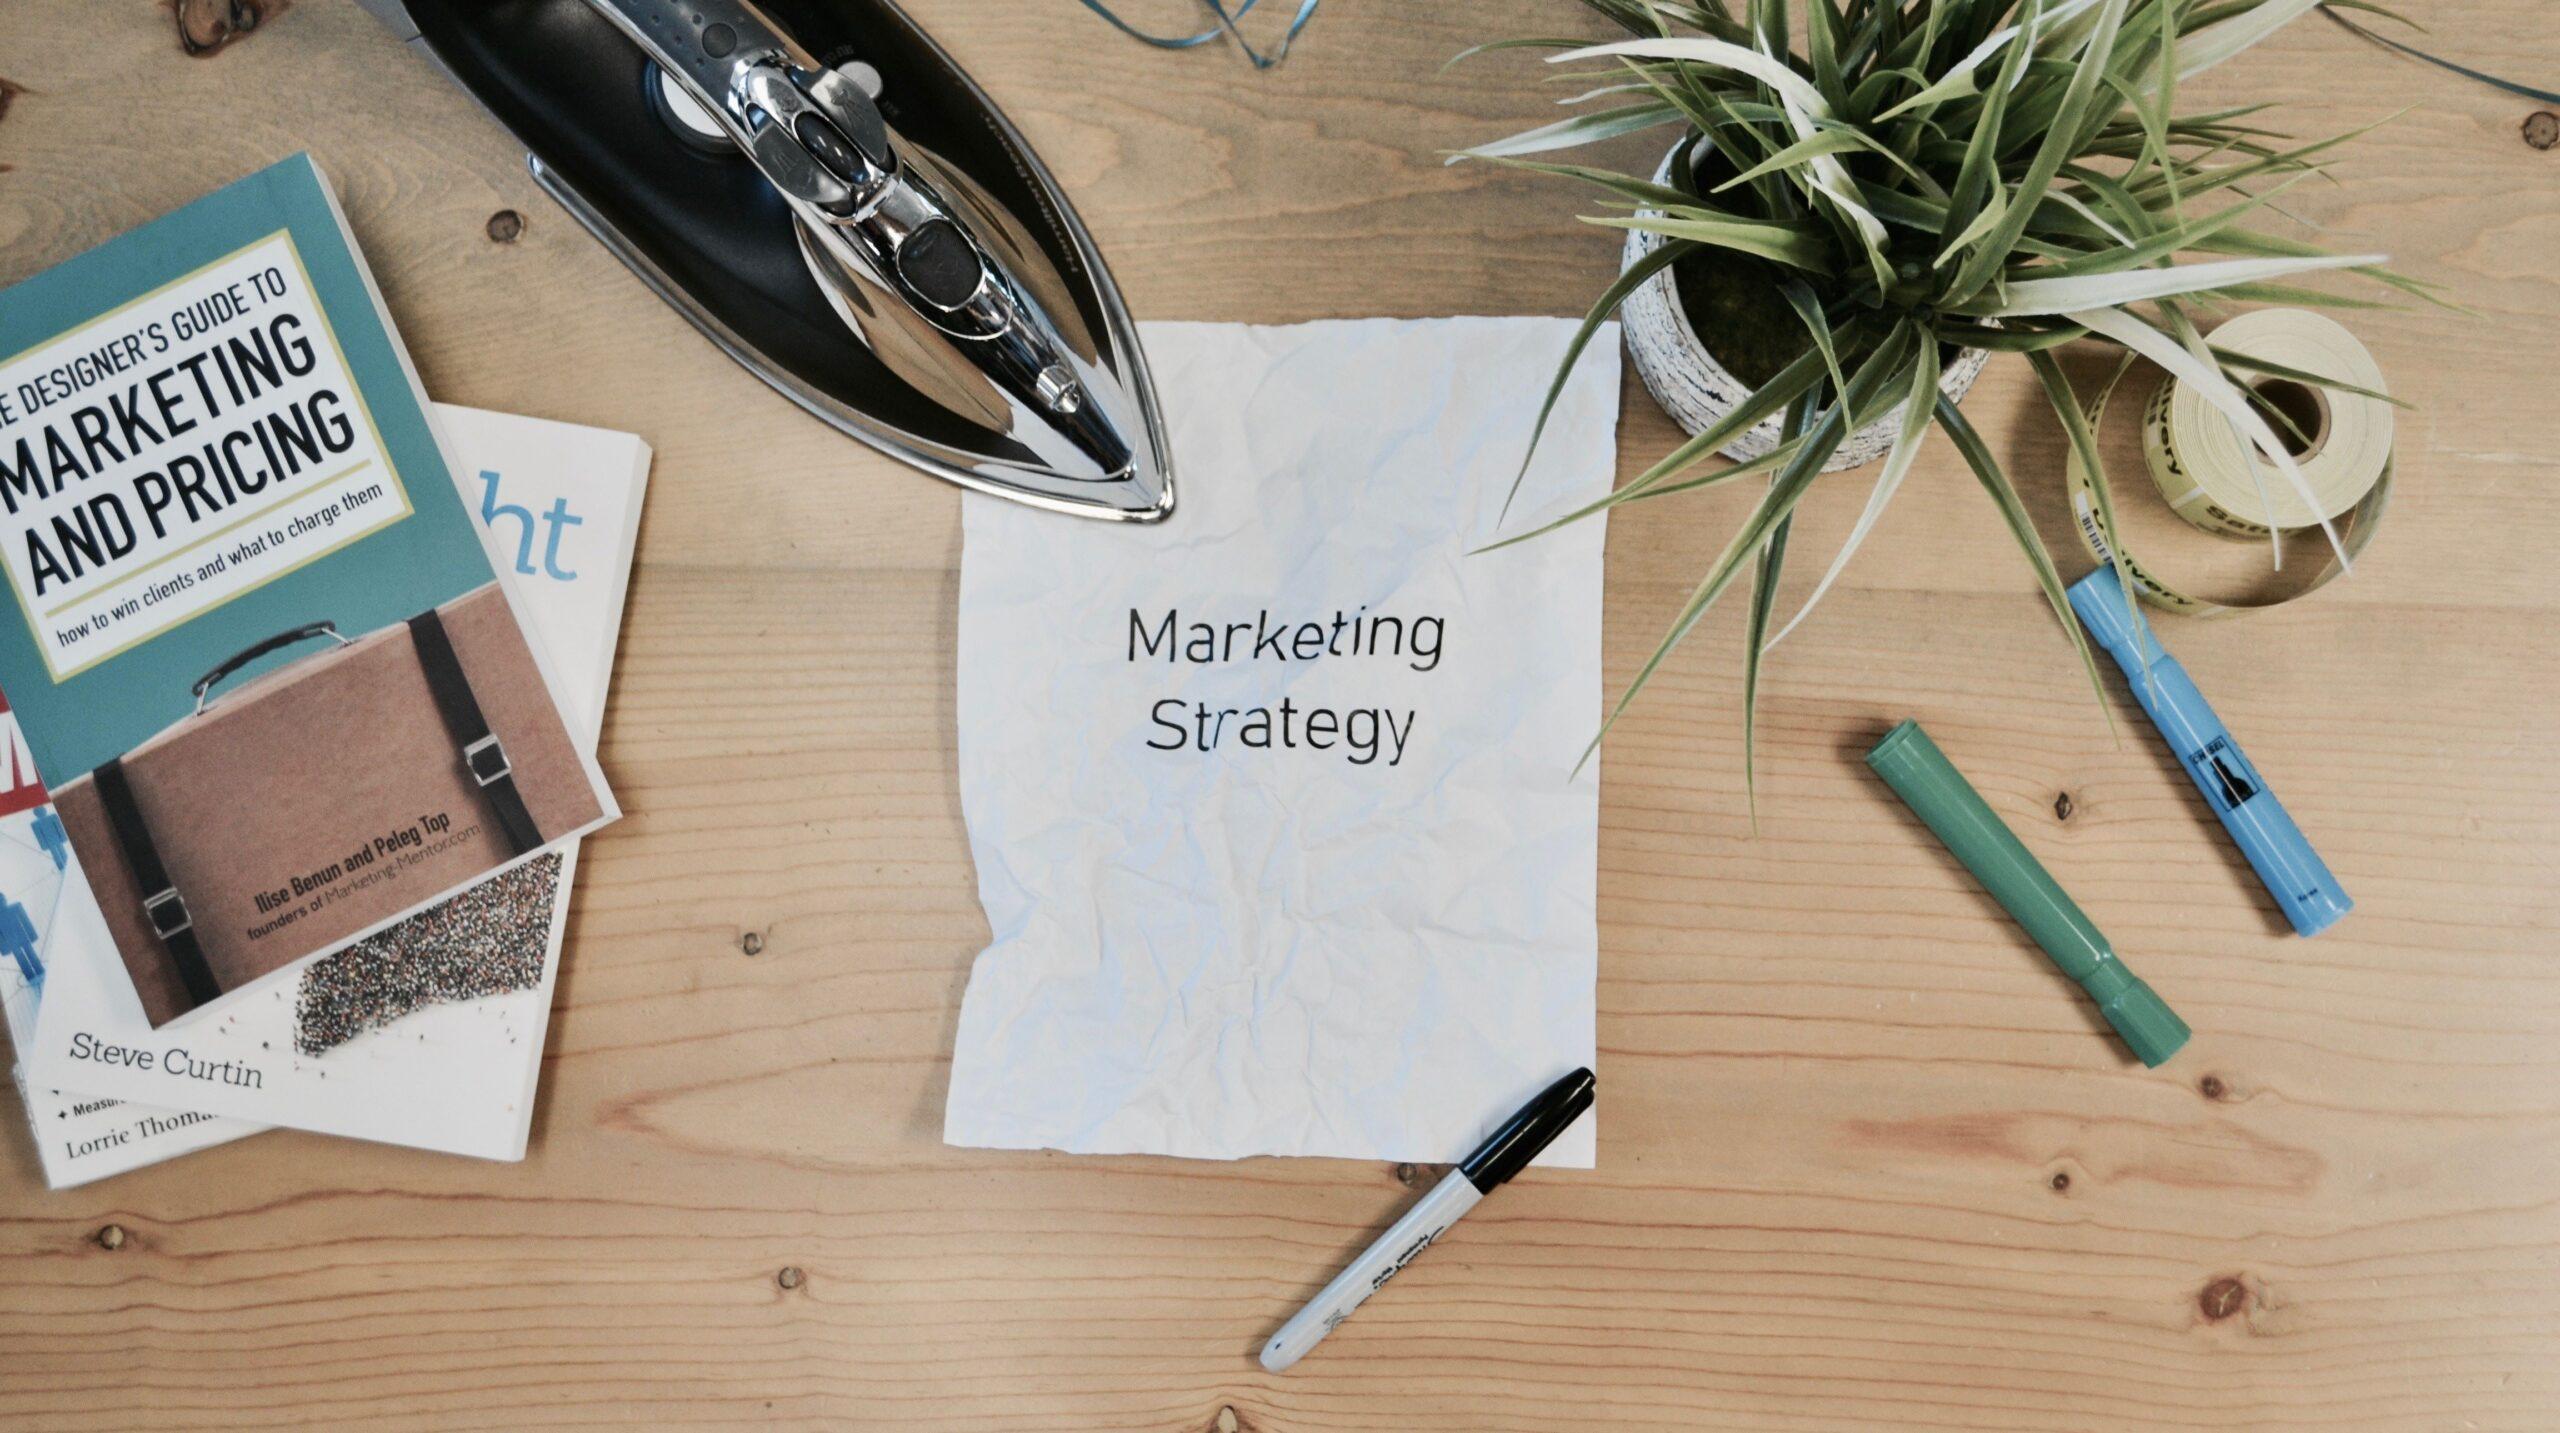 The words 'marketing strategy' written on a piece of paper, with an iron holding it held to a wooden surface.